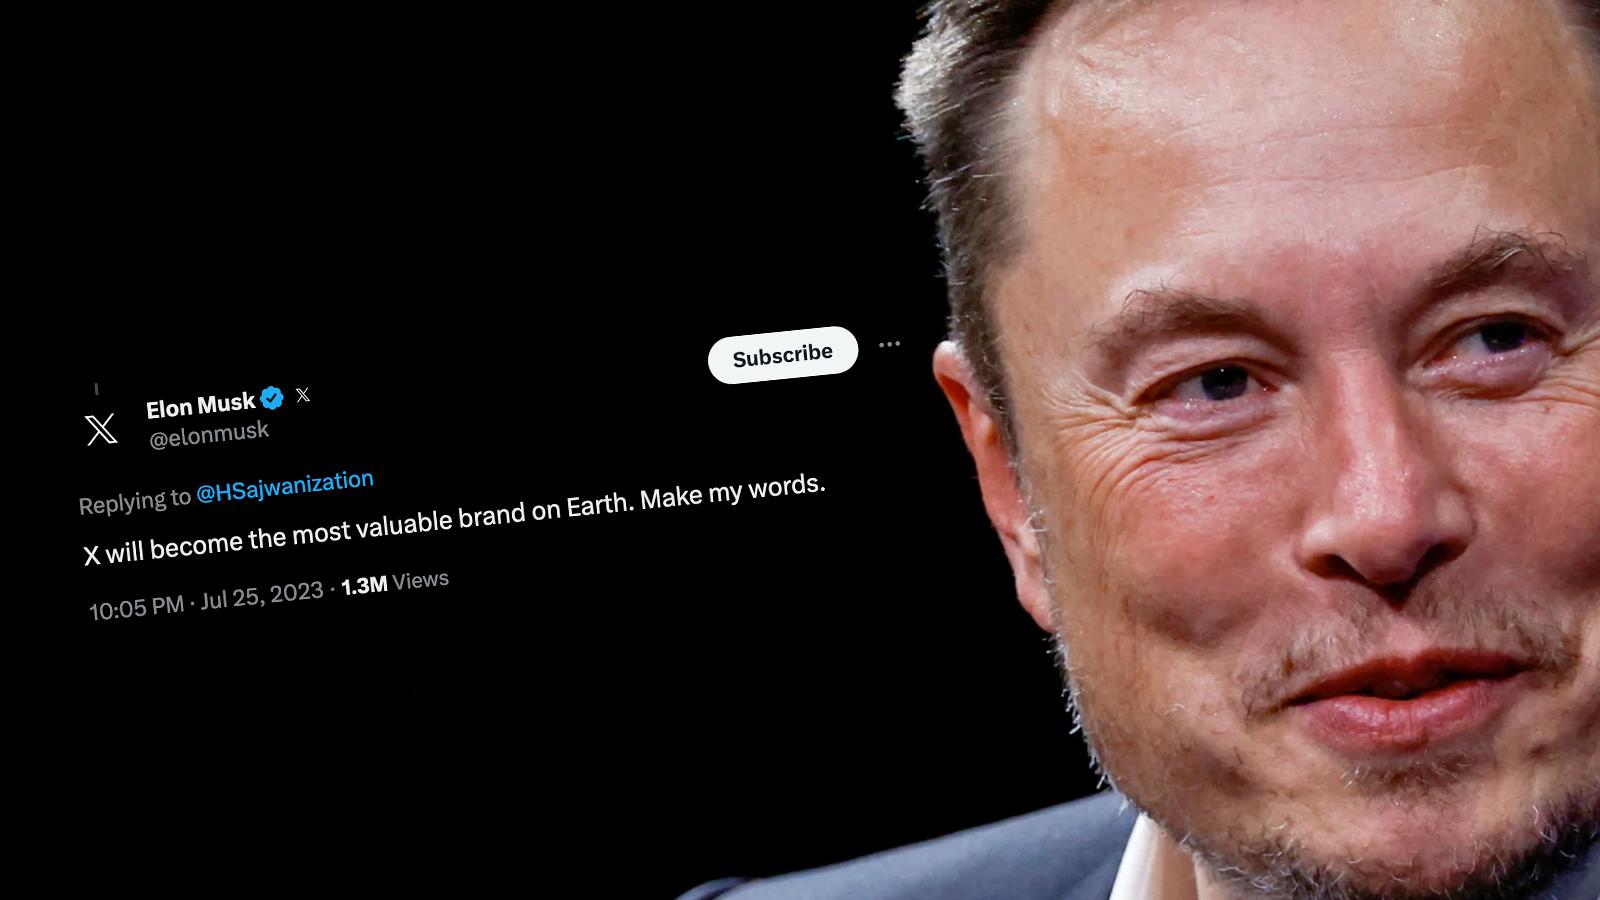 Elon Musk with his new tweet, saying "X will become the most valuable brand on Earth. Make my words."